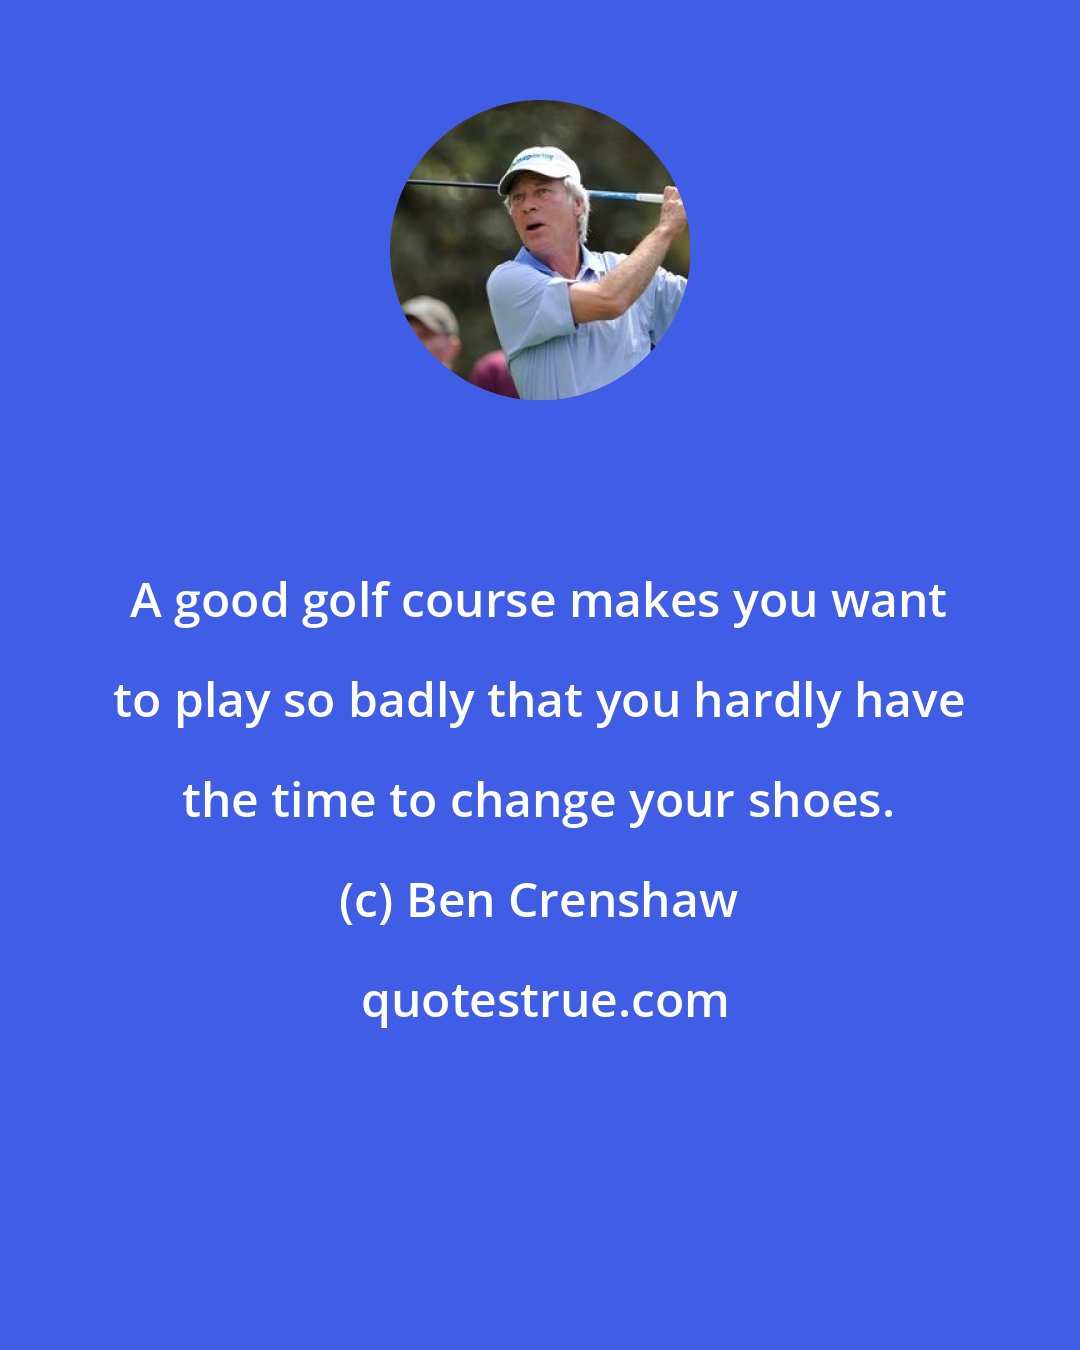 Ben Crenshaw: A good golf course makes you want to play so badly that you hardly have the time to change your shoes.